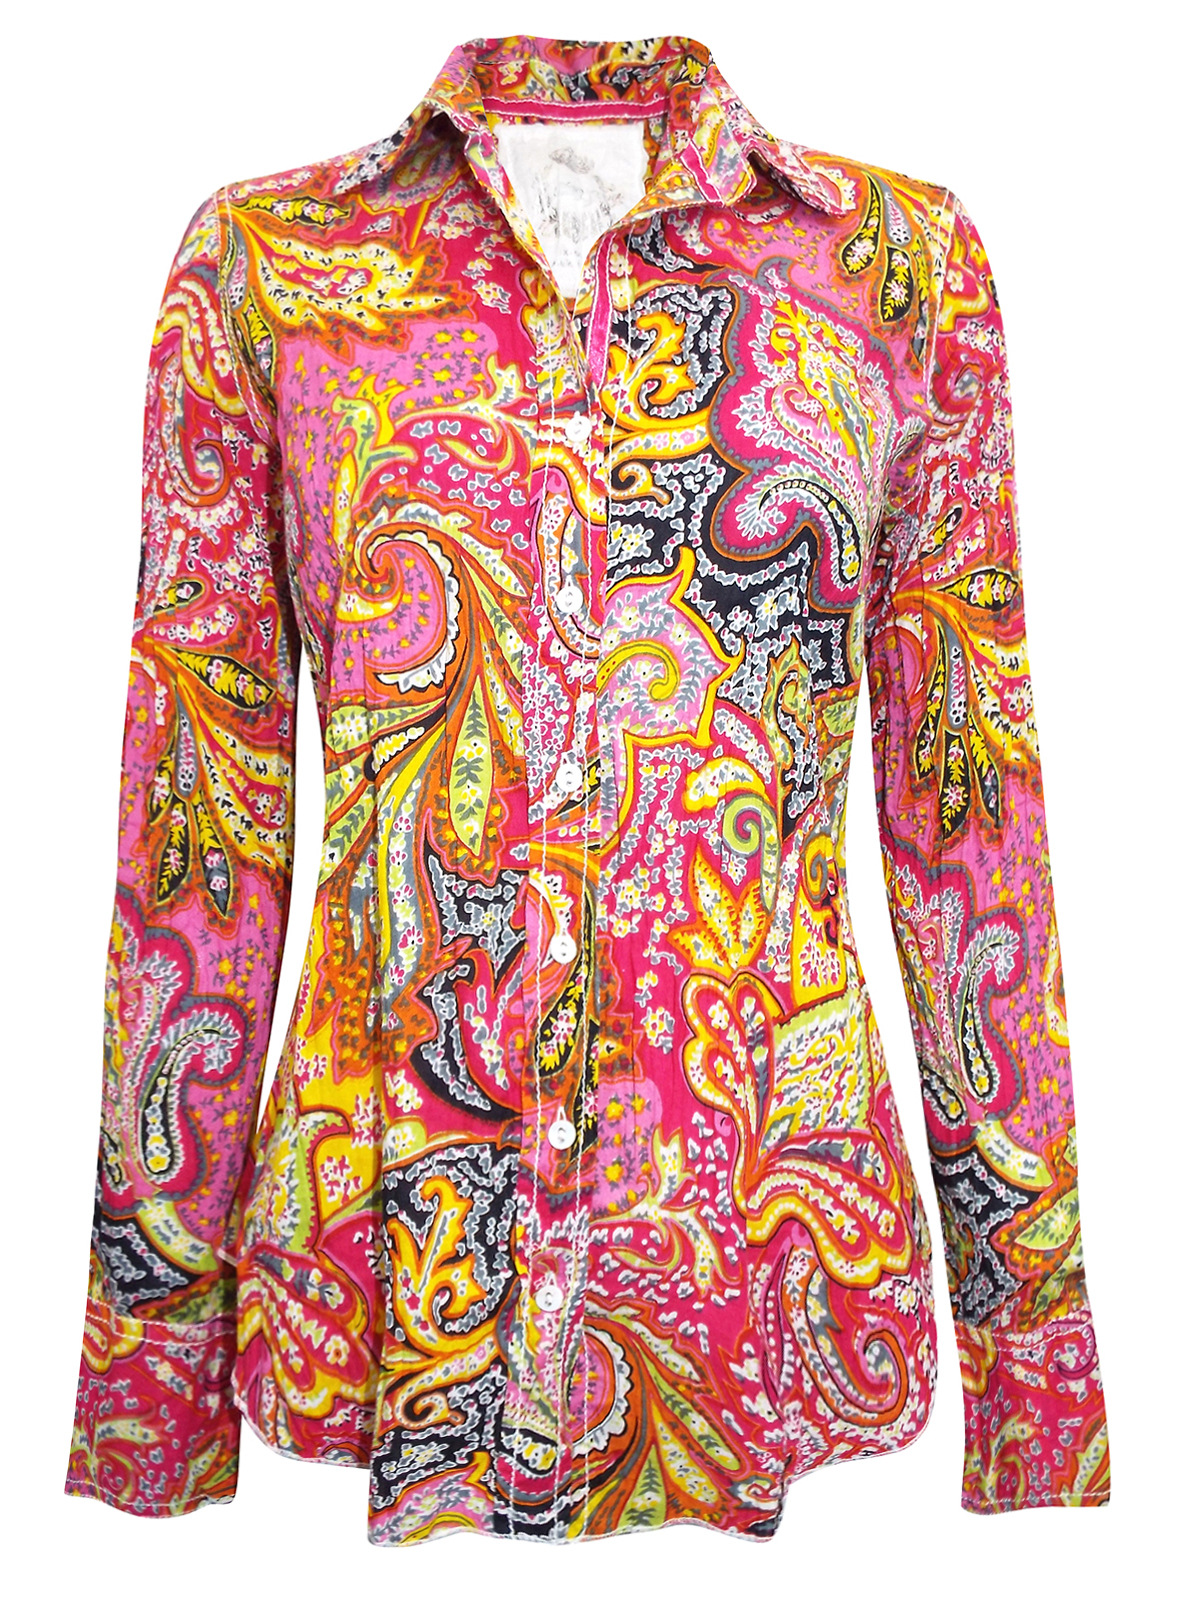 CINO - - CINO MULTI Printed Pure Cotton Crinkle Shirt - Size 10 to 16 ...